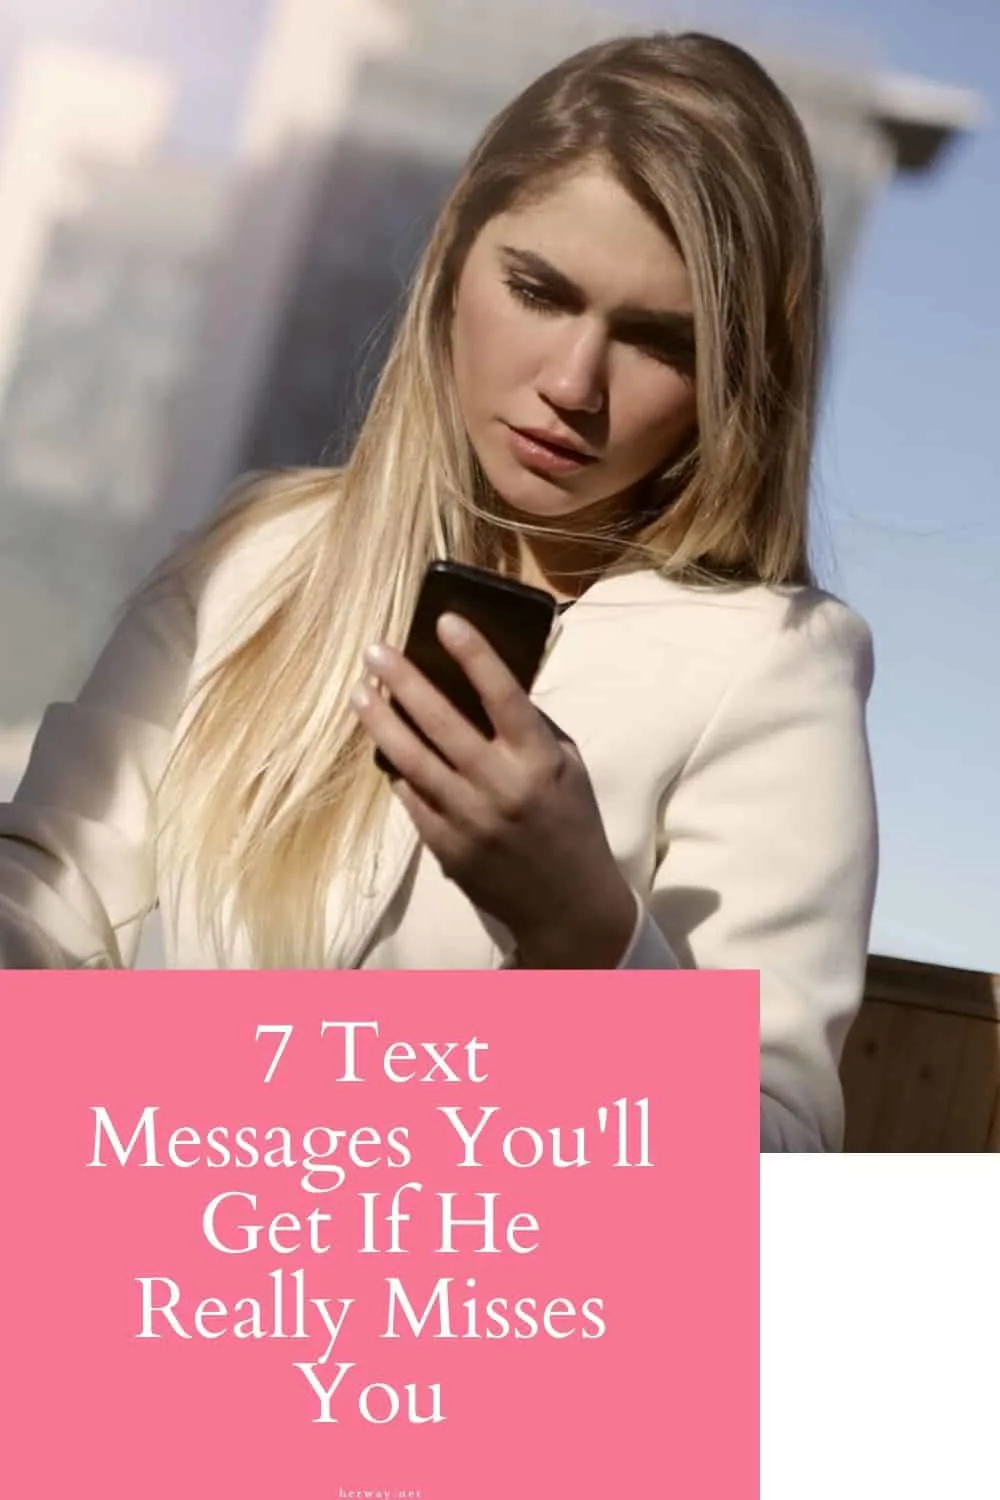 7 Text Messages You'll Get If He Really Misses You